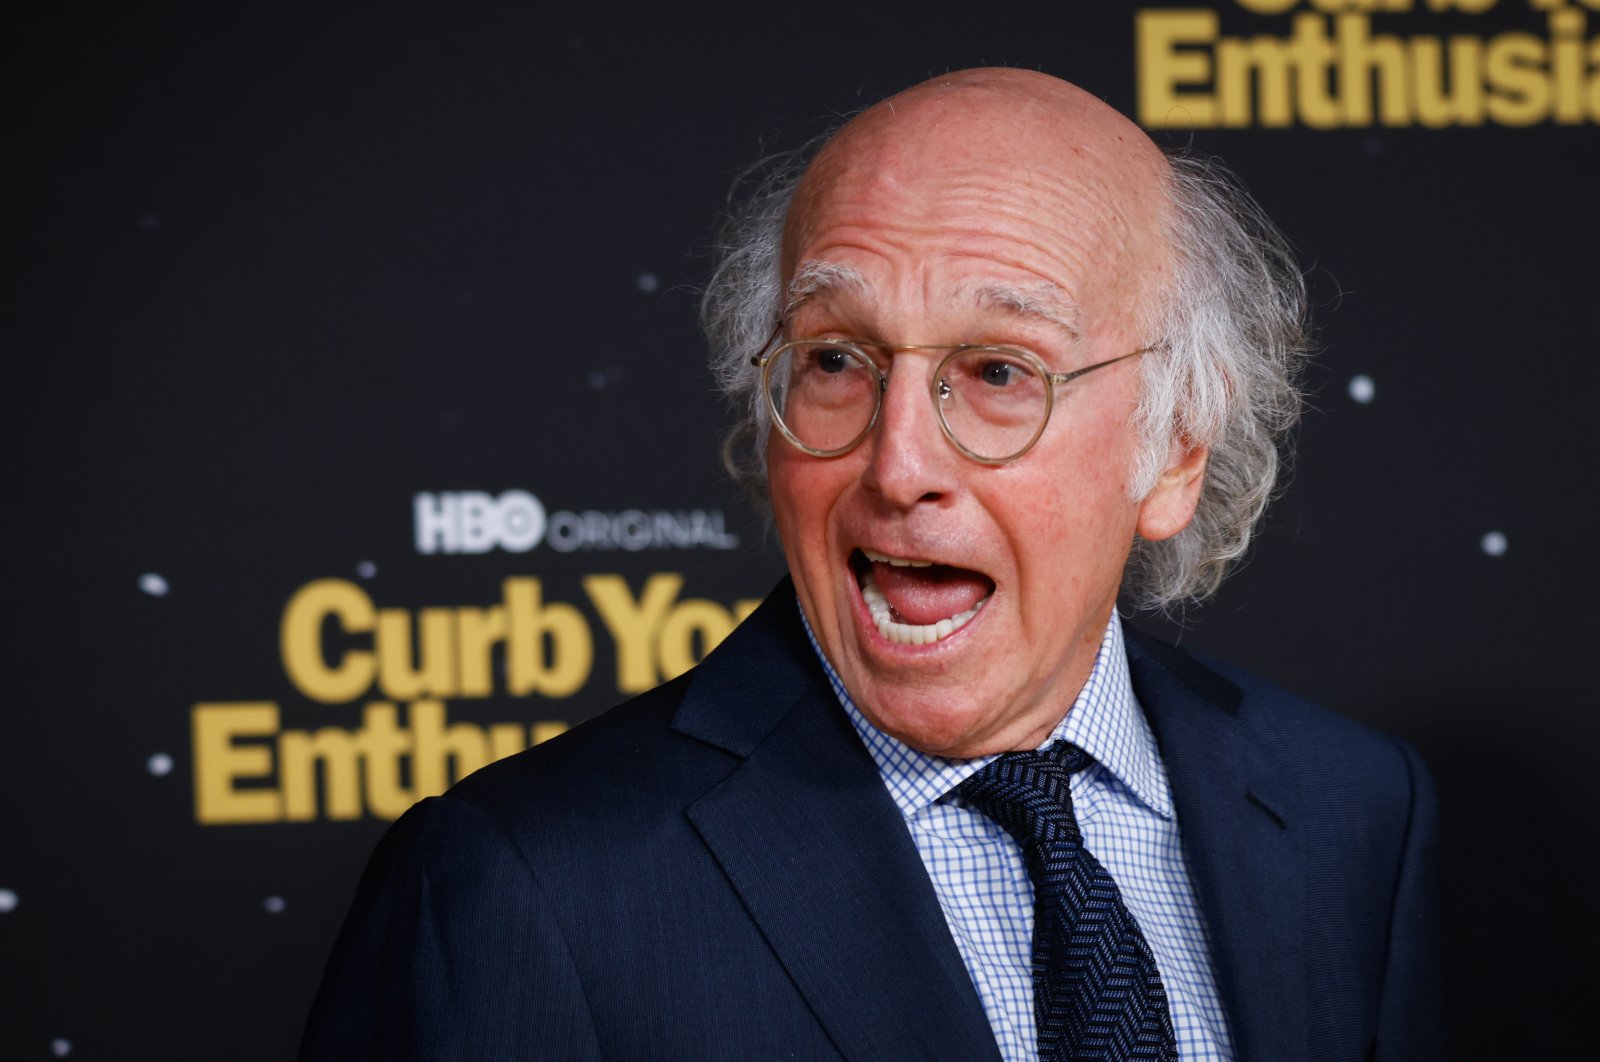 U.S. actor Larry David arrives for the Season 11 premiere of the HBO comedy show "Curb Your Enthusiasm" at Paramount Studios in Los Angeles, California, U.S., Oct. 19, 2021.  (EPA Photo)